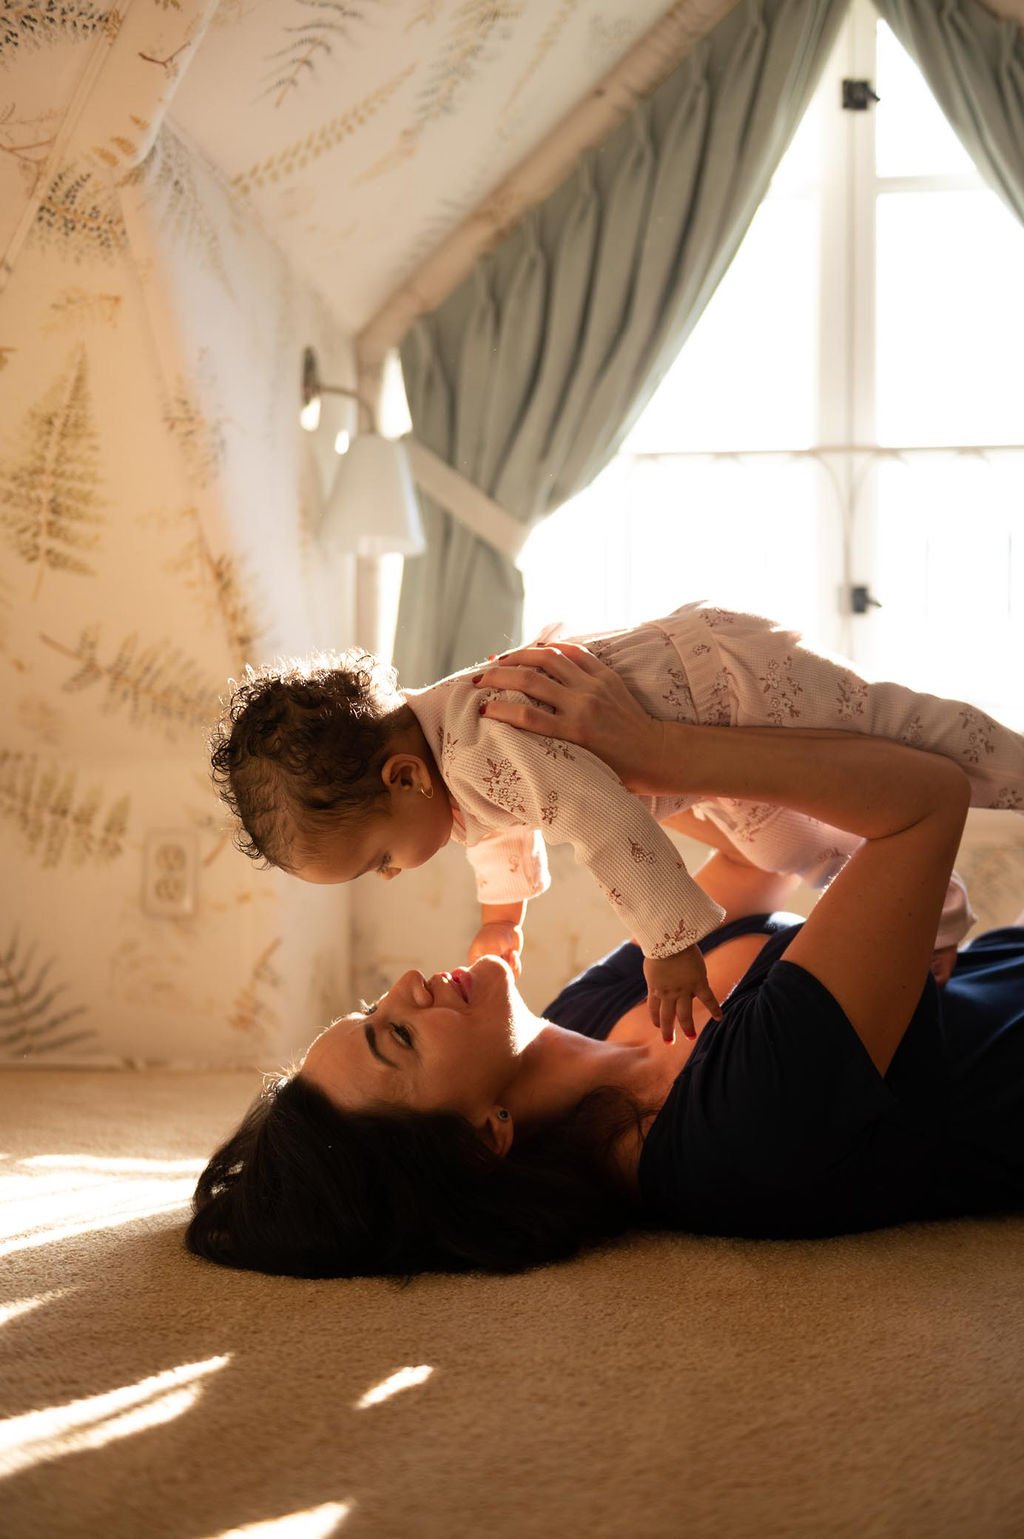 A mother, wearing brand loungewear, and her infant are captured in personal brand photography.